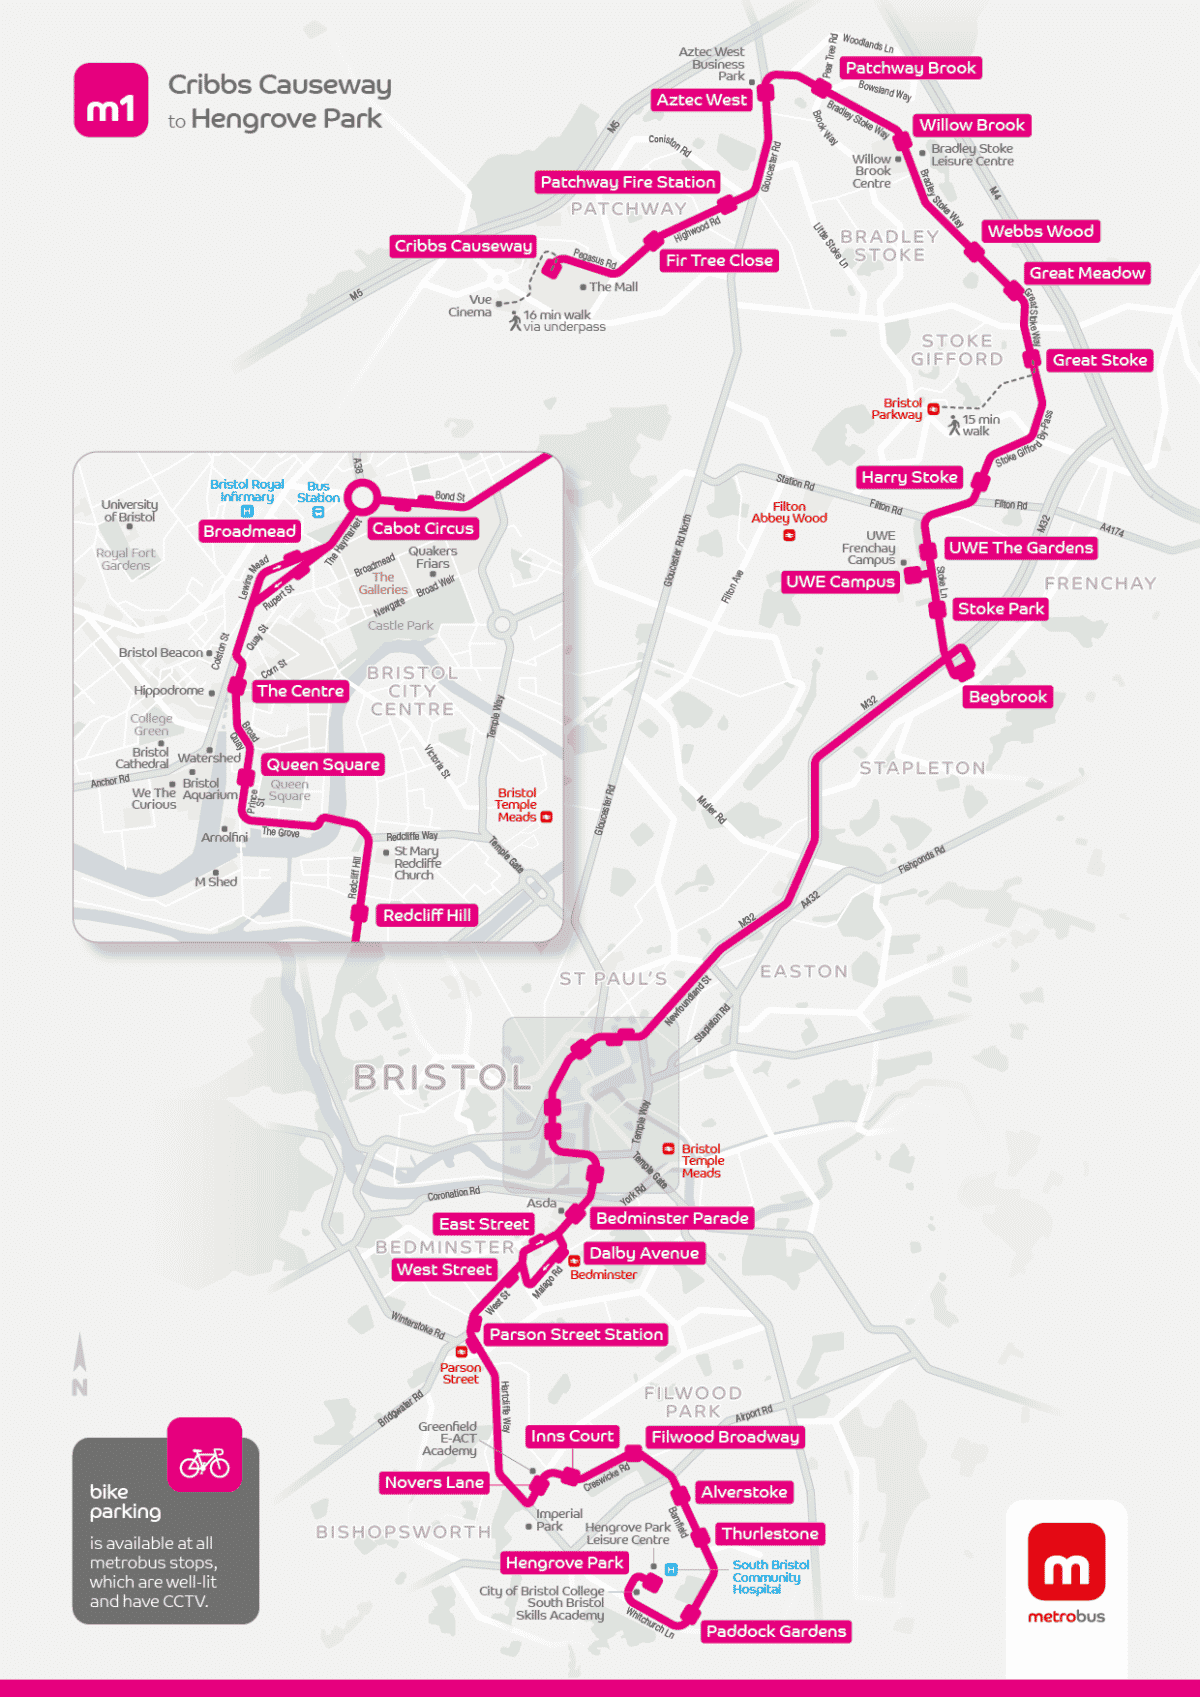 Route map of m1 service, operating between Cribbs Causeway to Hengrove Park via Patchway, UWE and Bristol City Centre. Bike parking is available at all metrobus stops, which are well-lit and have CCTV.